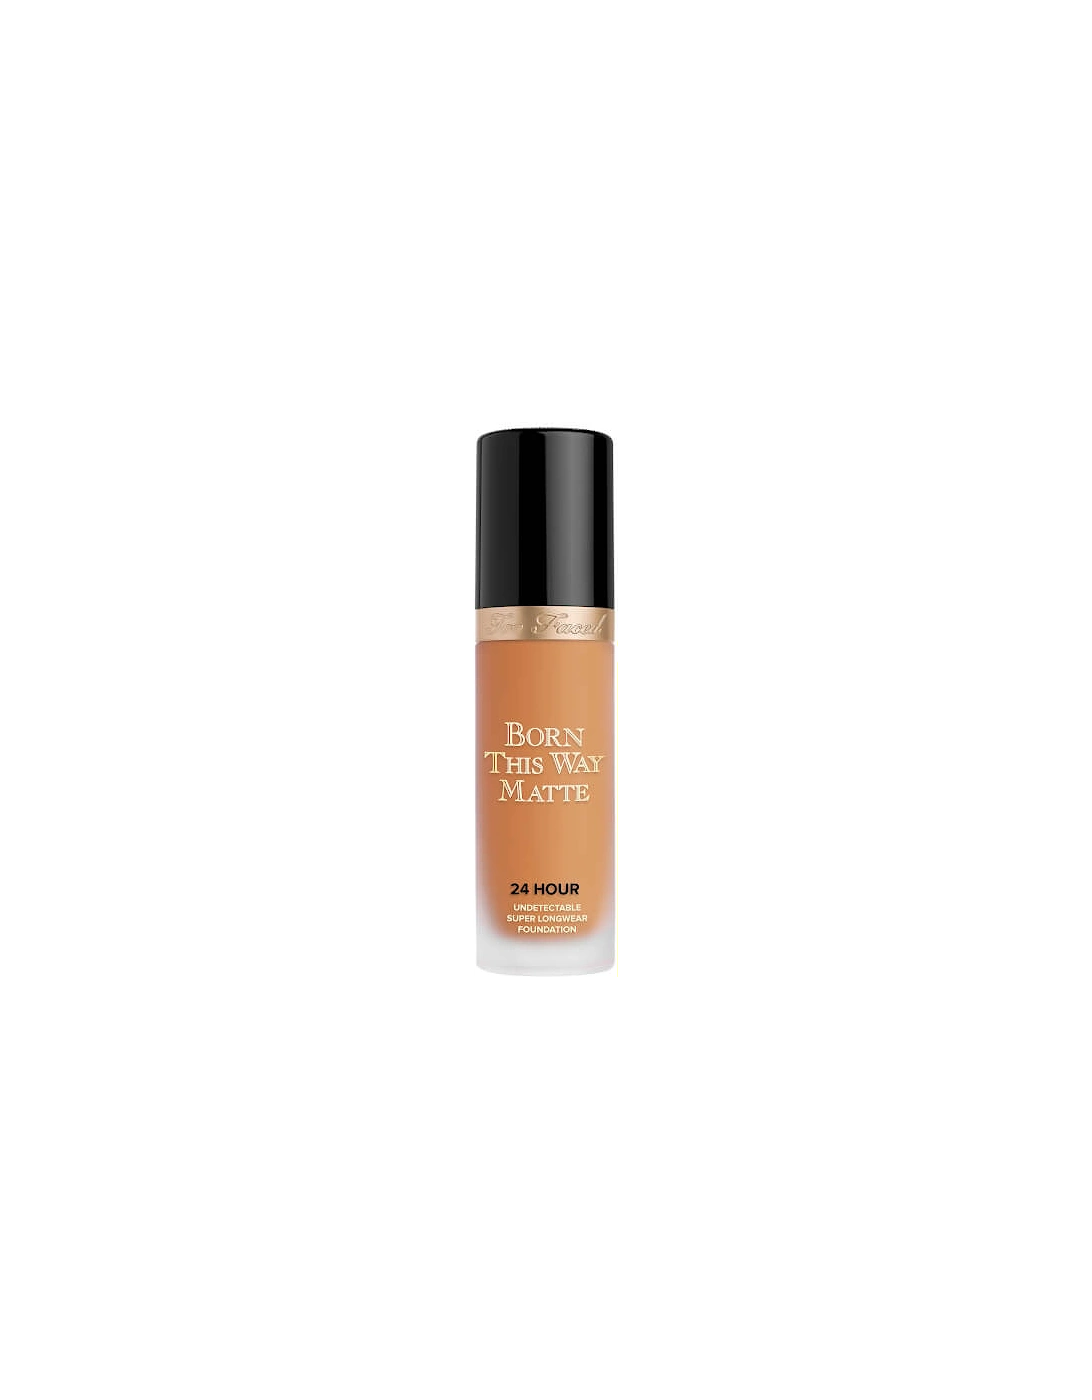 Born This Way Matte 24 Hour Long-Wear Foundation - Butter Pecan, 2 of 1